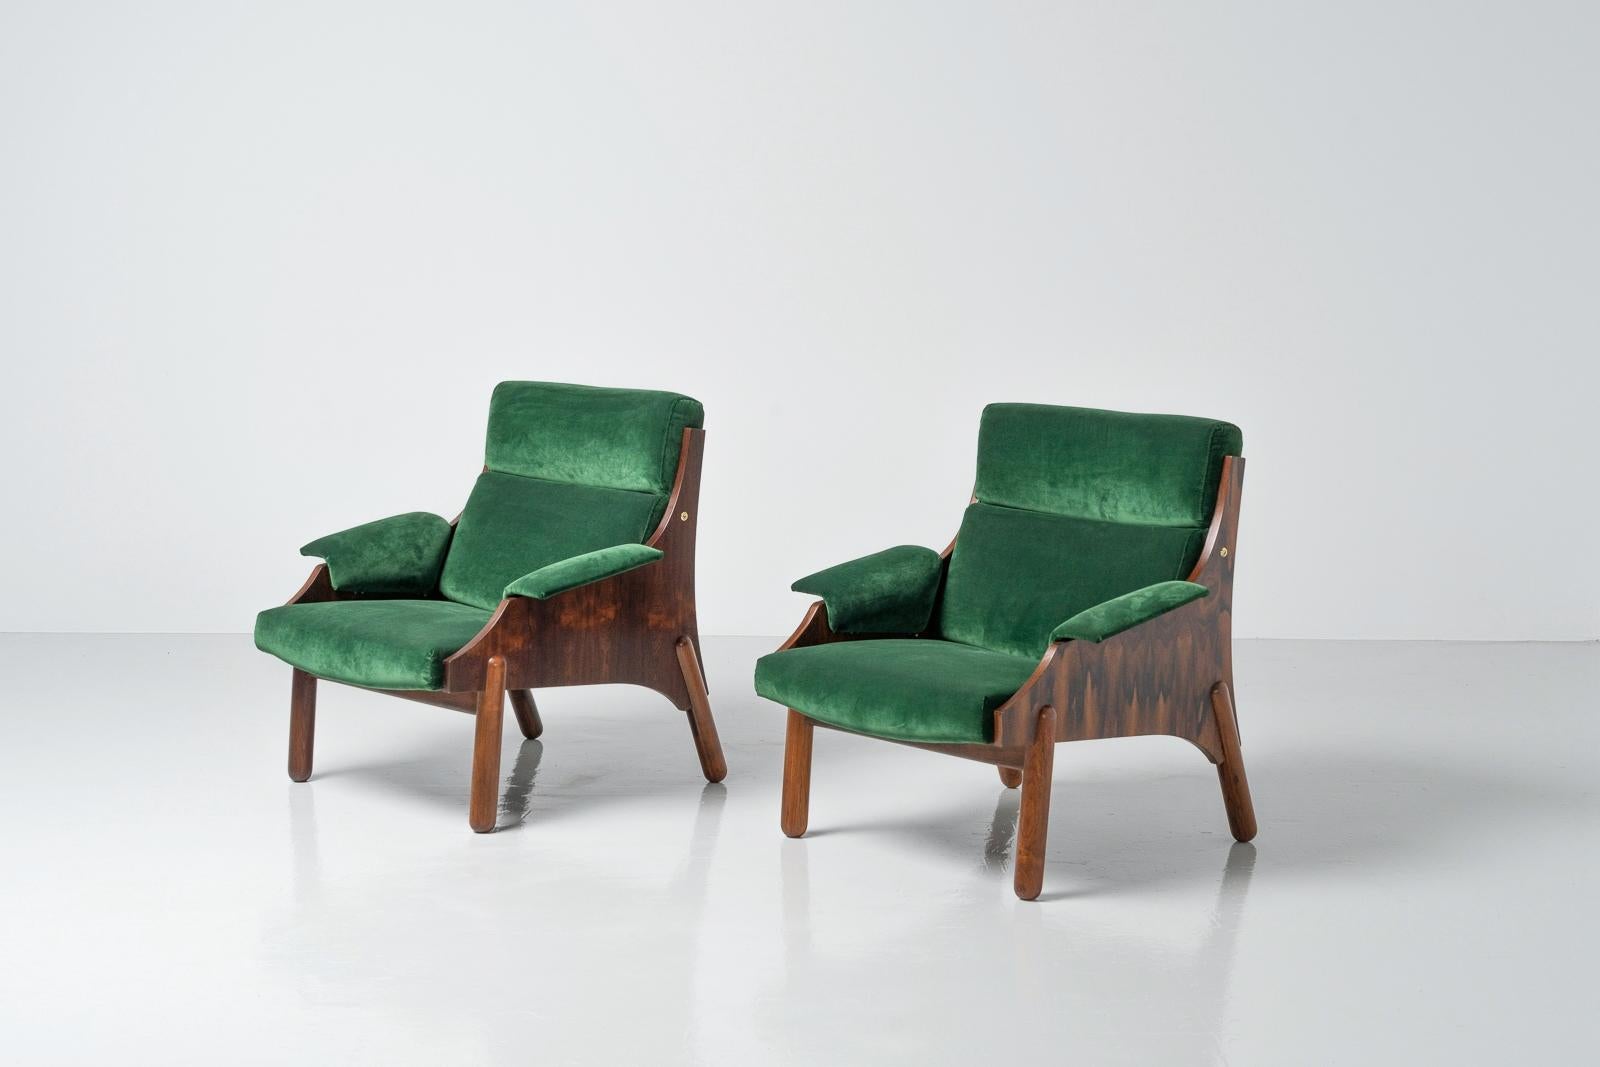 Elegant pair of lounge chairs manufactured by Sormani, Italy 1965. The chairs are not very common and in very good original condition. The green velvet is a nice contrast with the rosewood frame. Very interesting joinery of the legs merging into the